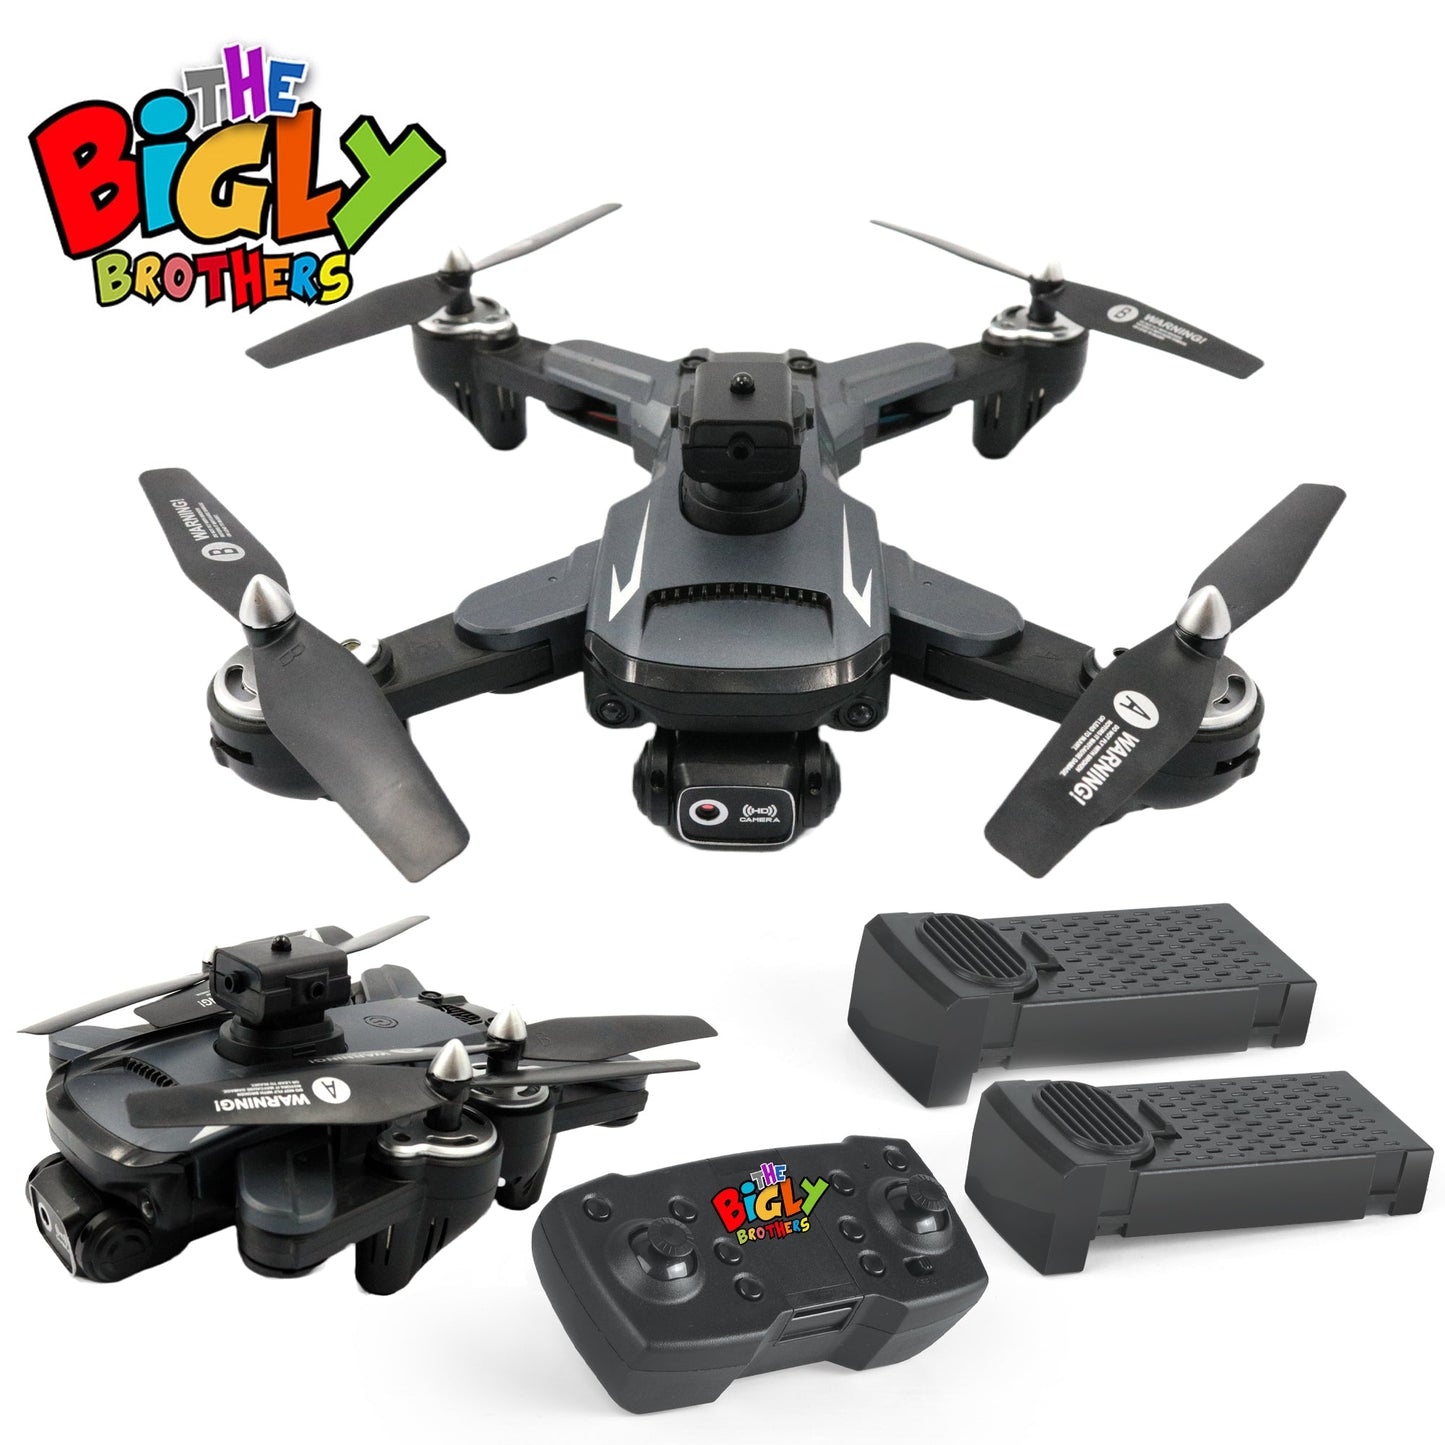 REFURBISHED: The Bigly Brothers Mark V Extremis BLACK 4k Drone with Camera, 360 Degrees of Obstacle Avoidance, Brushless Motors, 2 Batteries Included, Below 249 Grams, with Carrying Case, NO ASSEMBLY REQUIRED Ready to Fly!